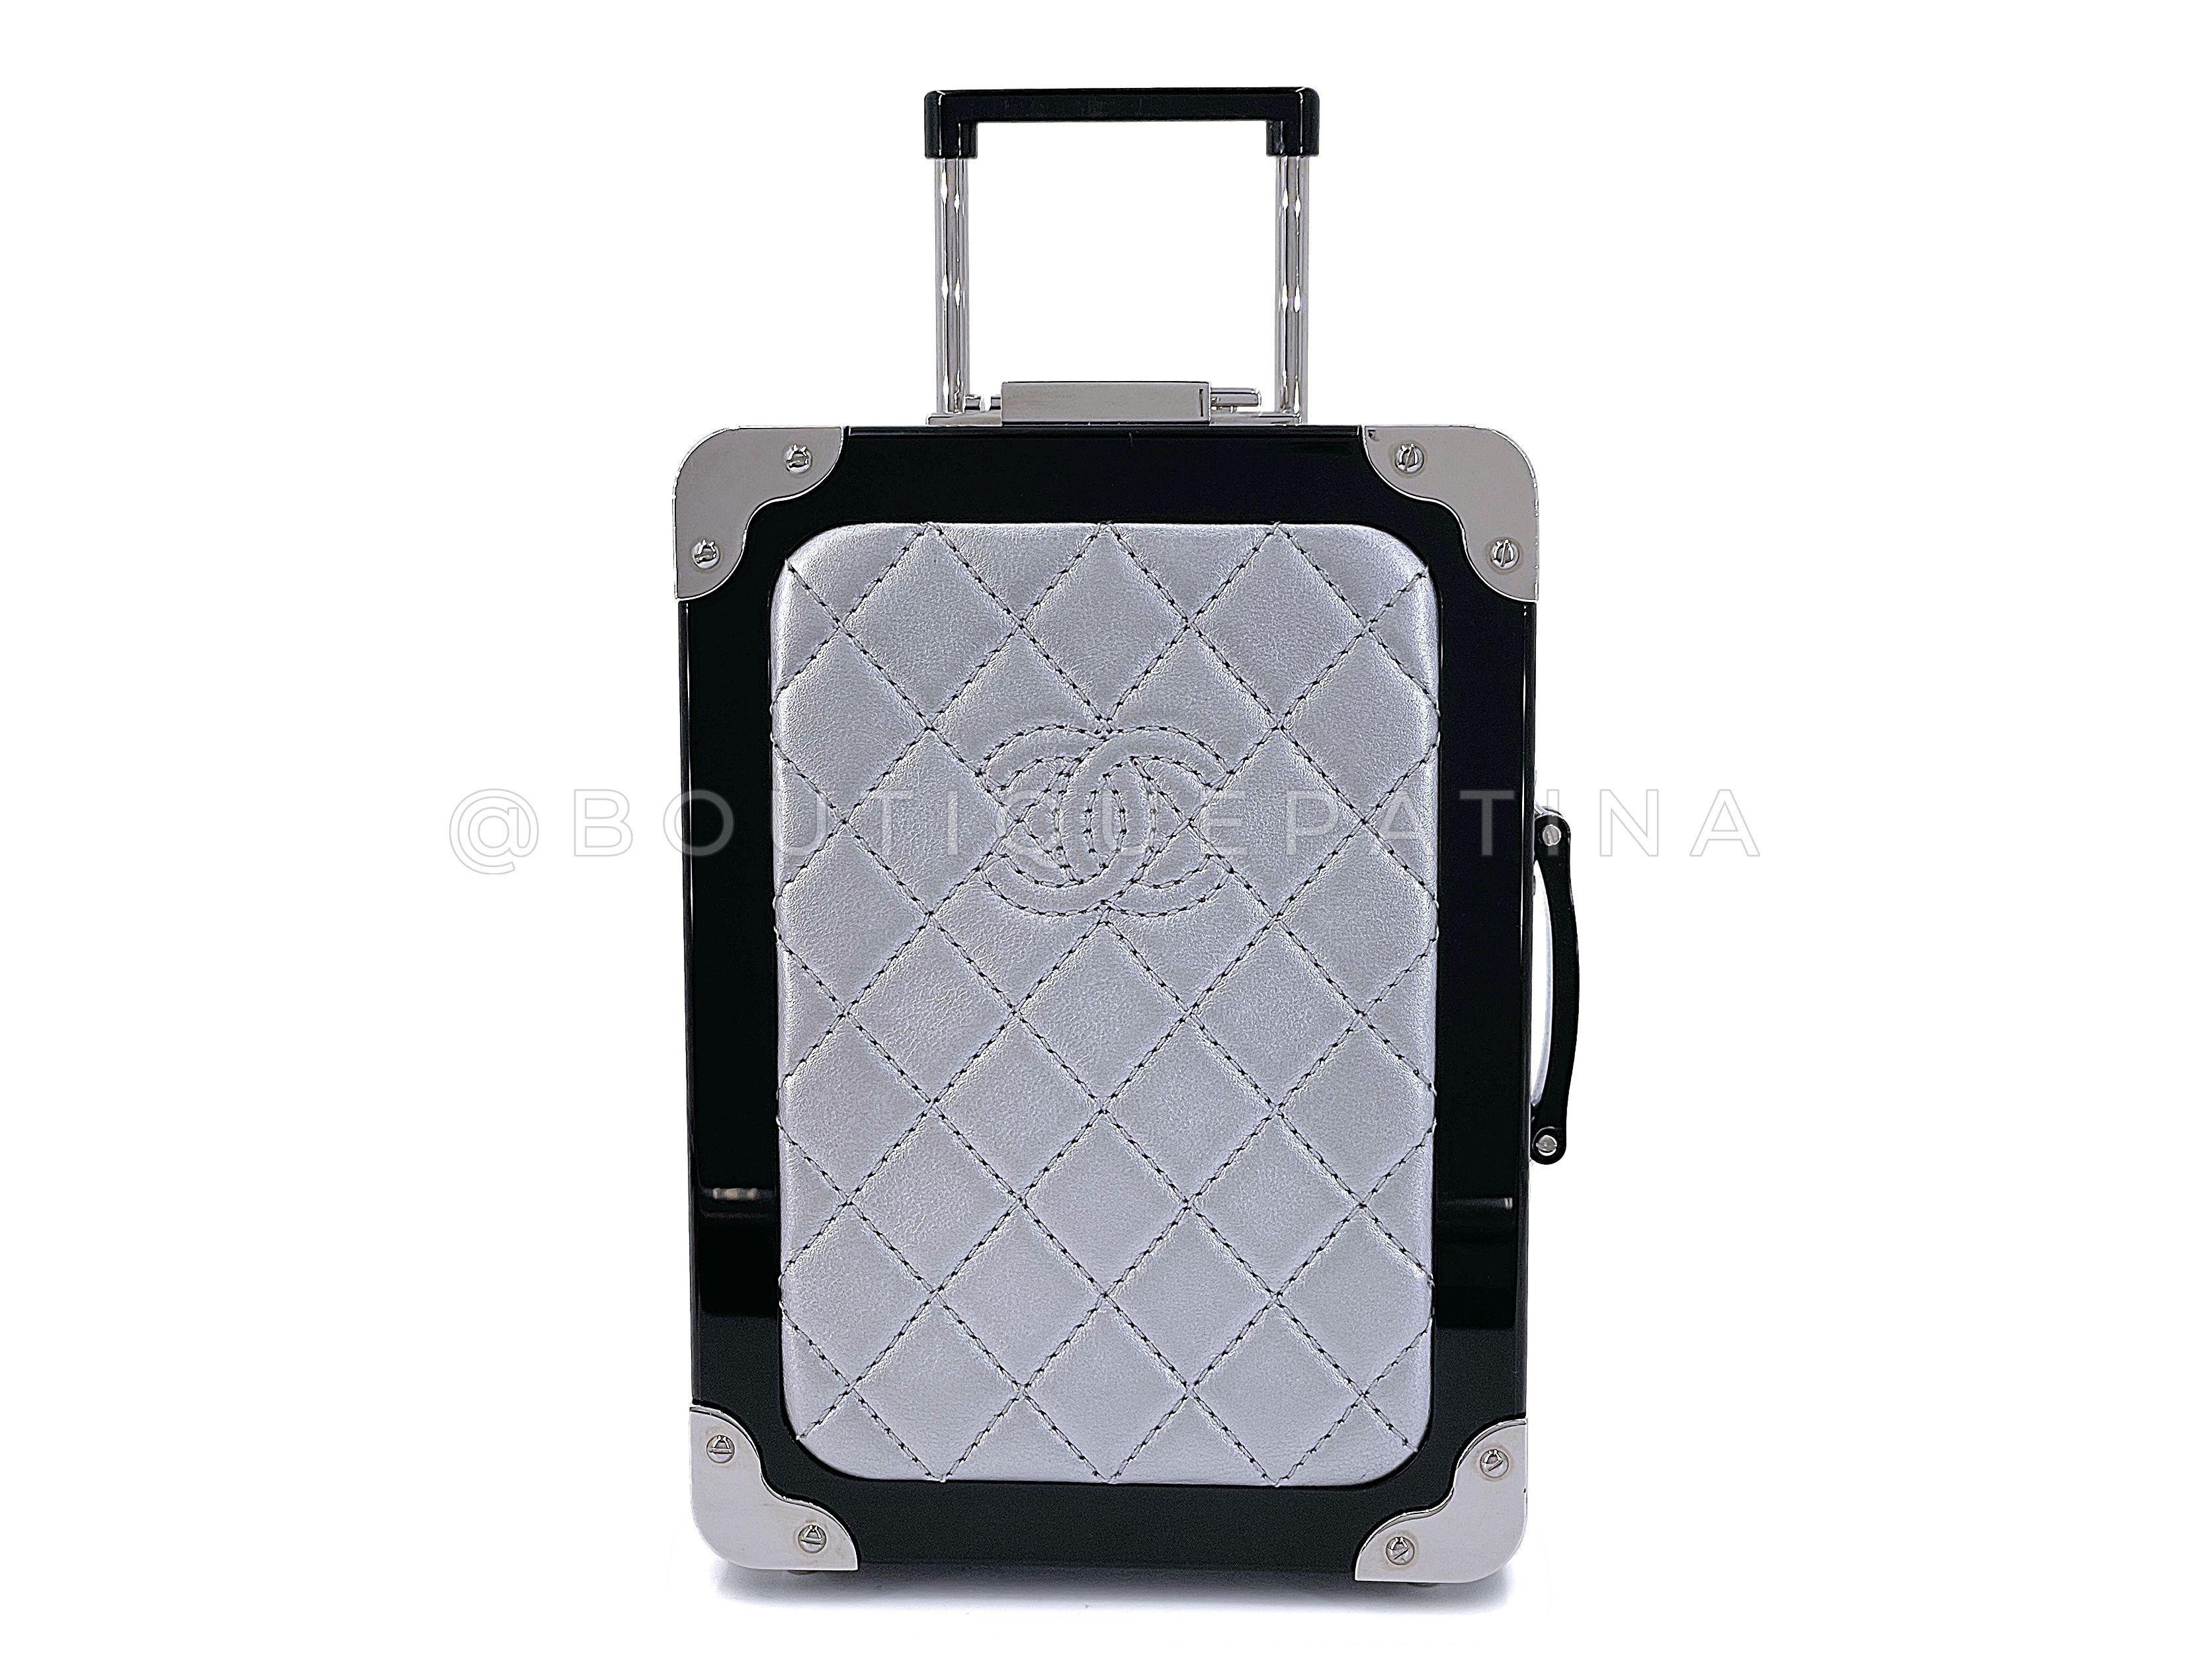 Store item: 67681
Chanel 2016 Airlines Evening In The Air Trolley Minaudière Clutch Bag Gray Silver

From Lagerfeld's 2016 Spring Airlines collection, with black leather interior, working telescopic handle and stainless steel feet and wheels. 

In